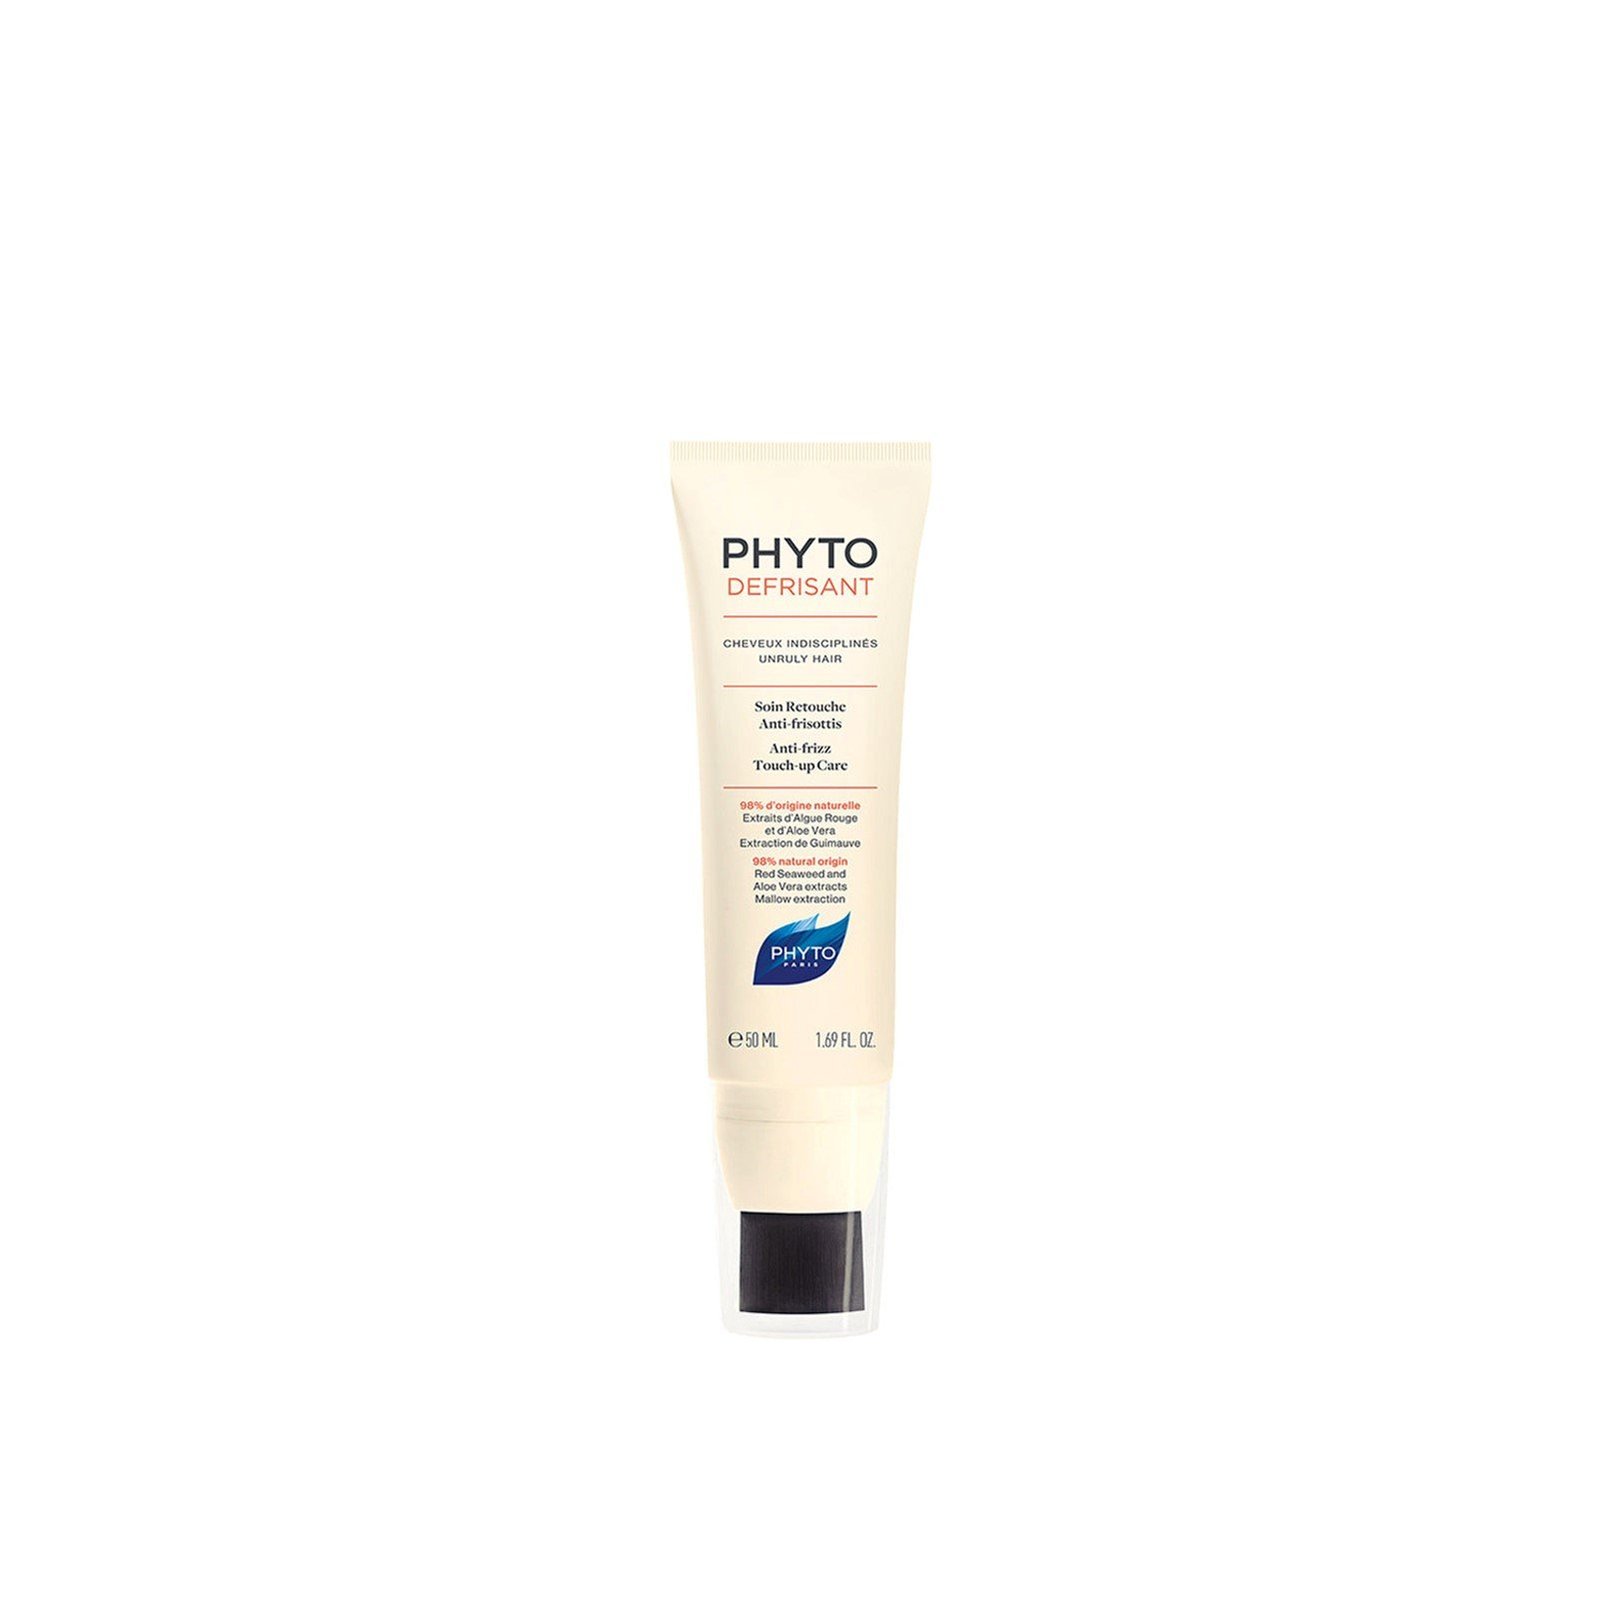 Phytodefrisant Anti-Frizz Touch-Up Care 50ml (1.69fl oz)